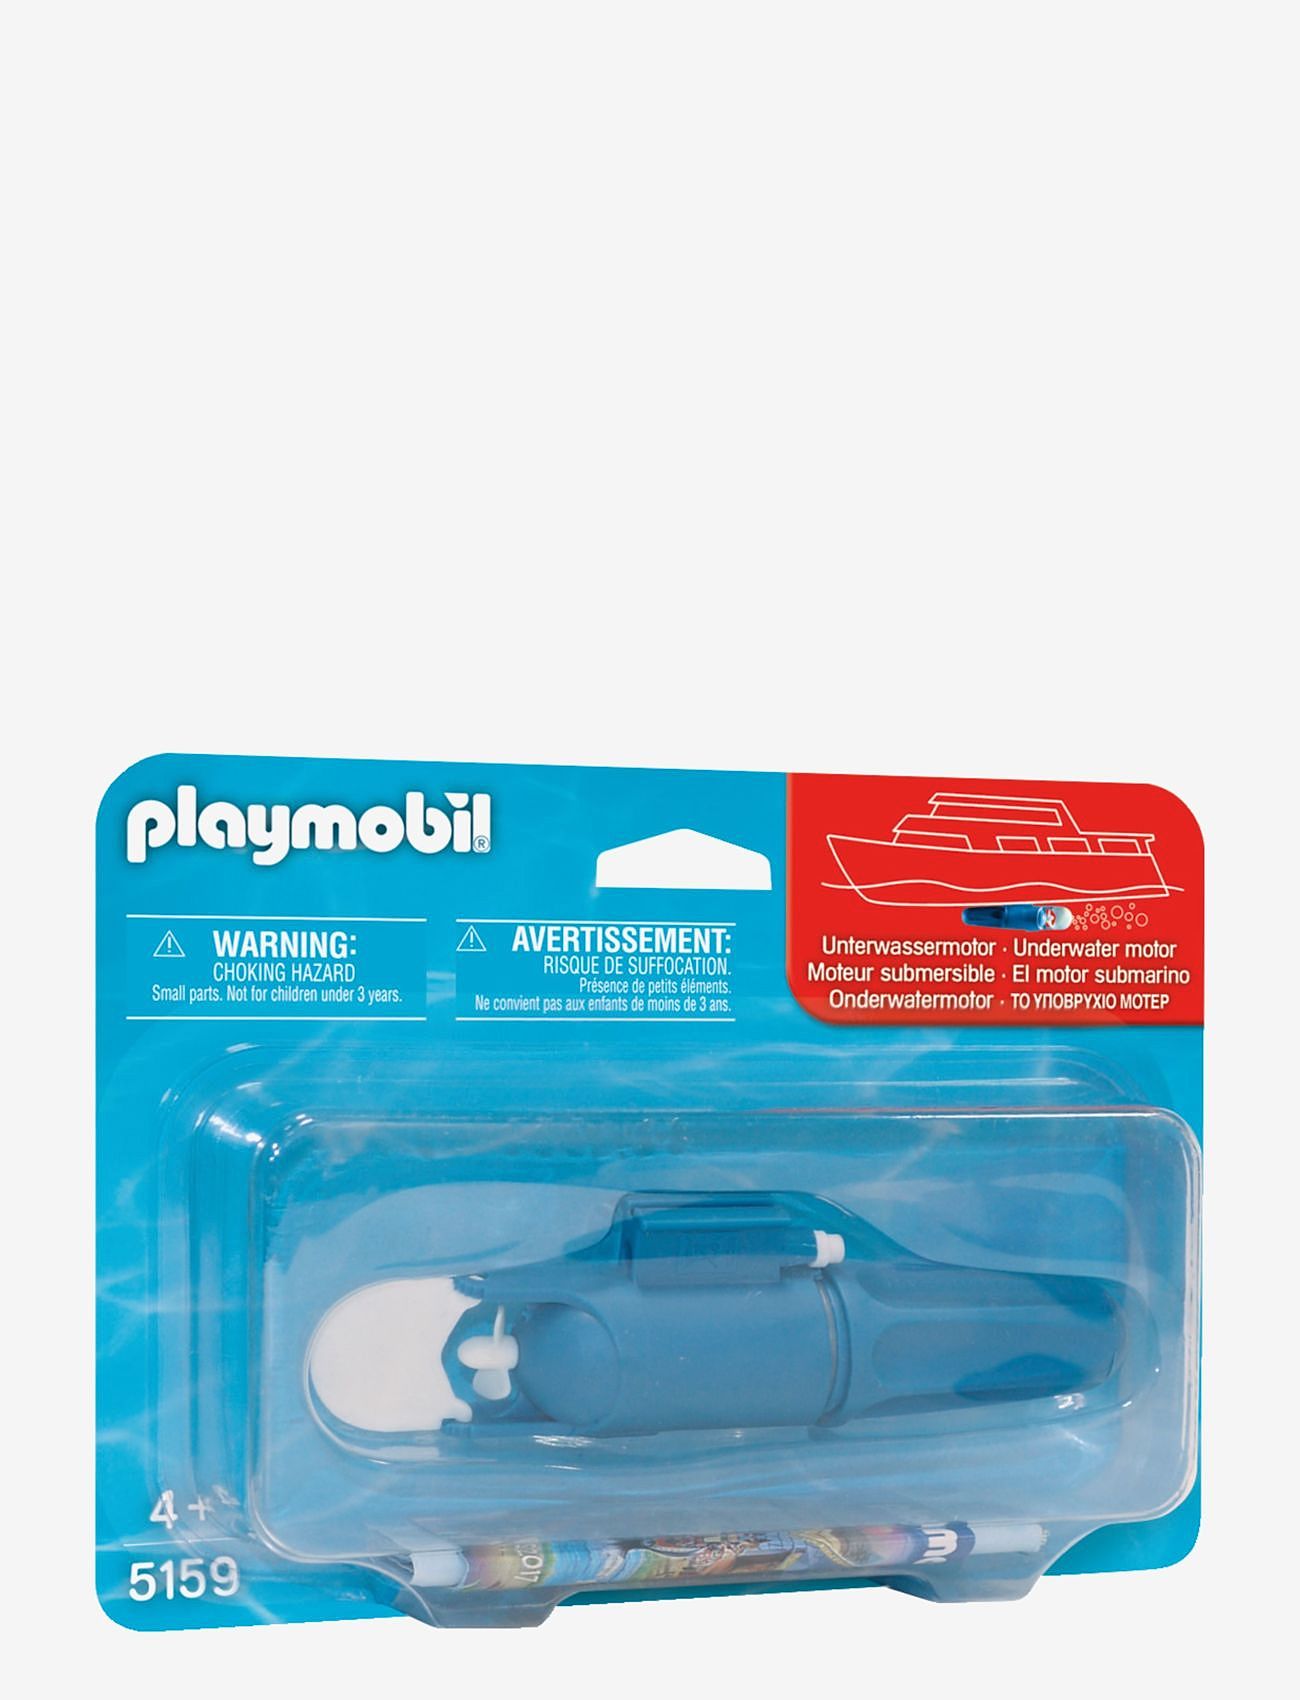 PLAYMOBIL - PLAYMOBIL Service Underwater Motor - 5159 - lowest prices - multicolored - 0